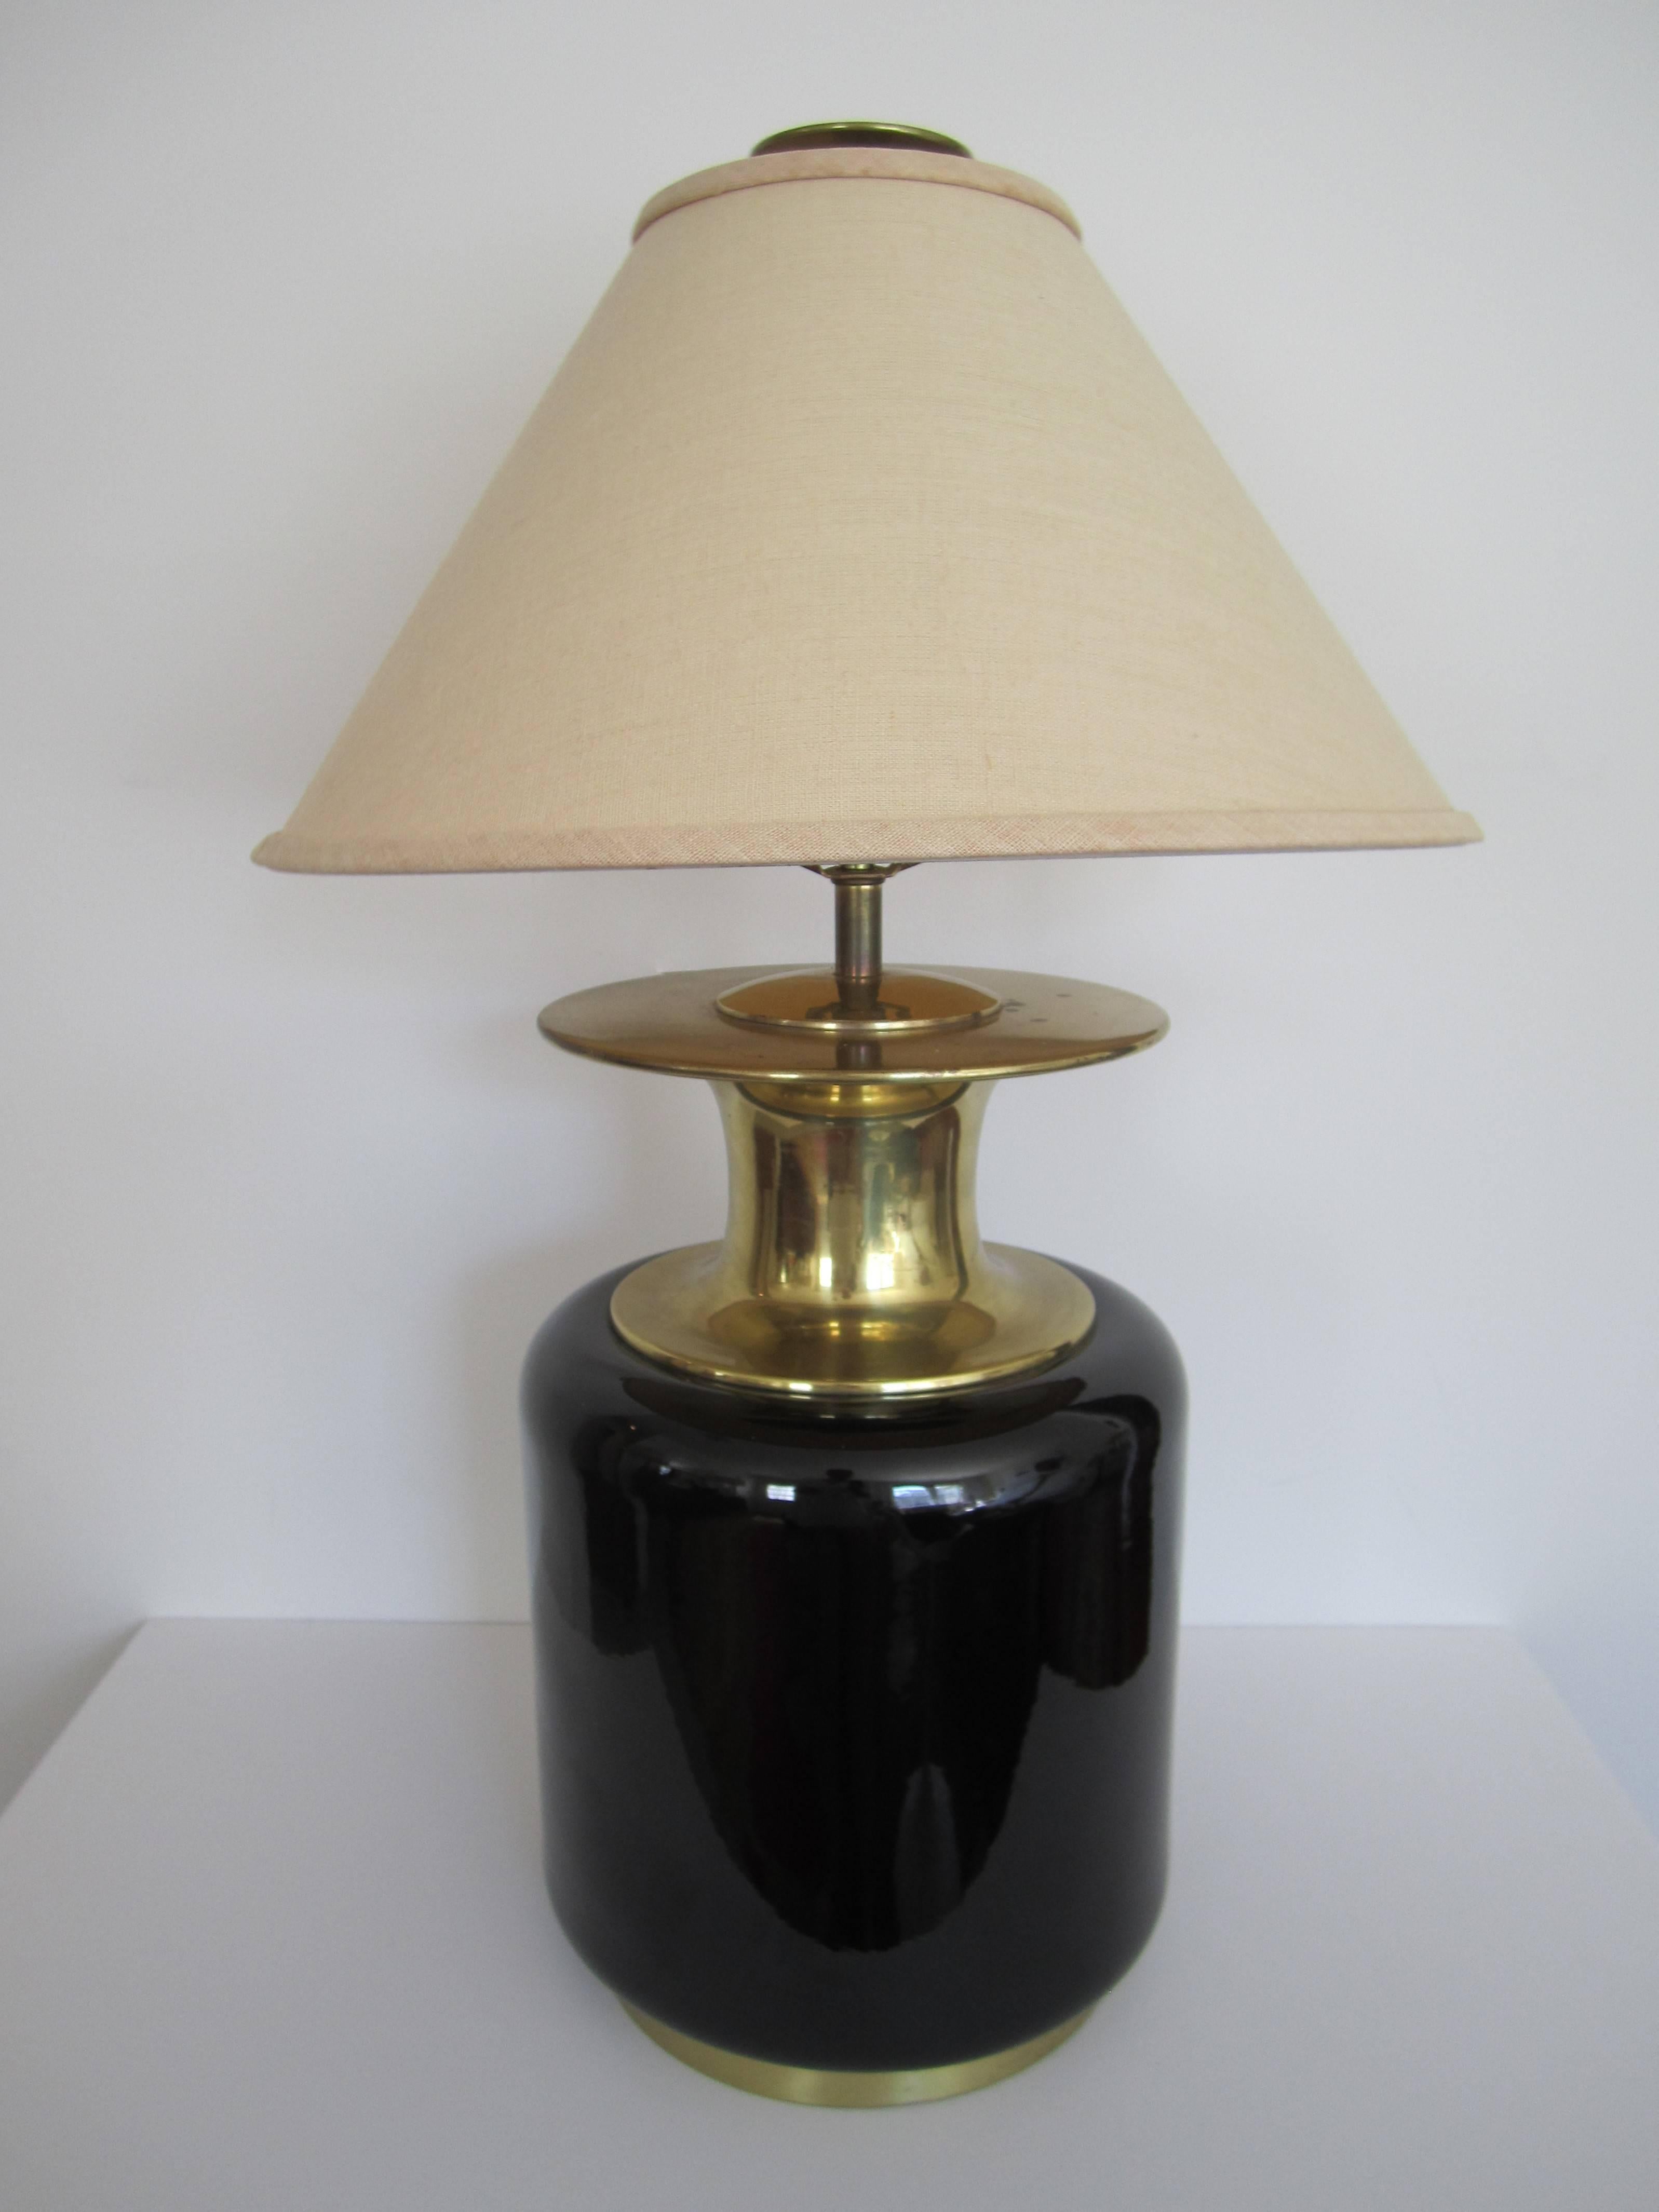 A relatively large, black glazed ceramic and brass table lamp by Chapman, Post-Modern period, circa 1980s. Table lamp Includes original large round brass finial. Maker's mark at socket: 